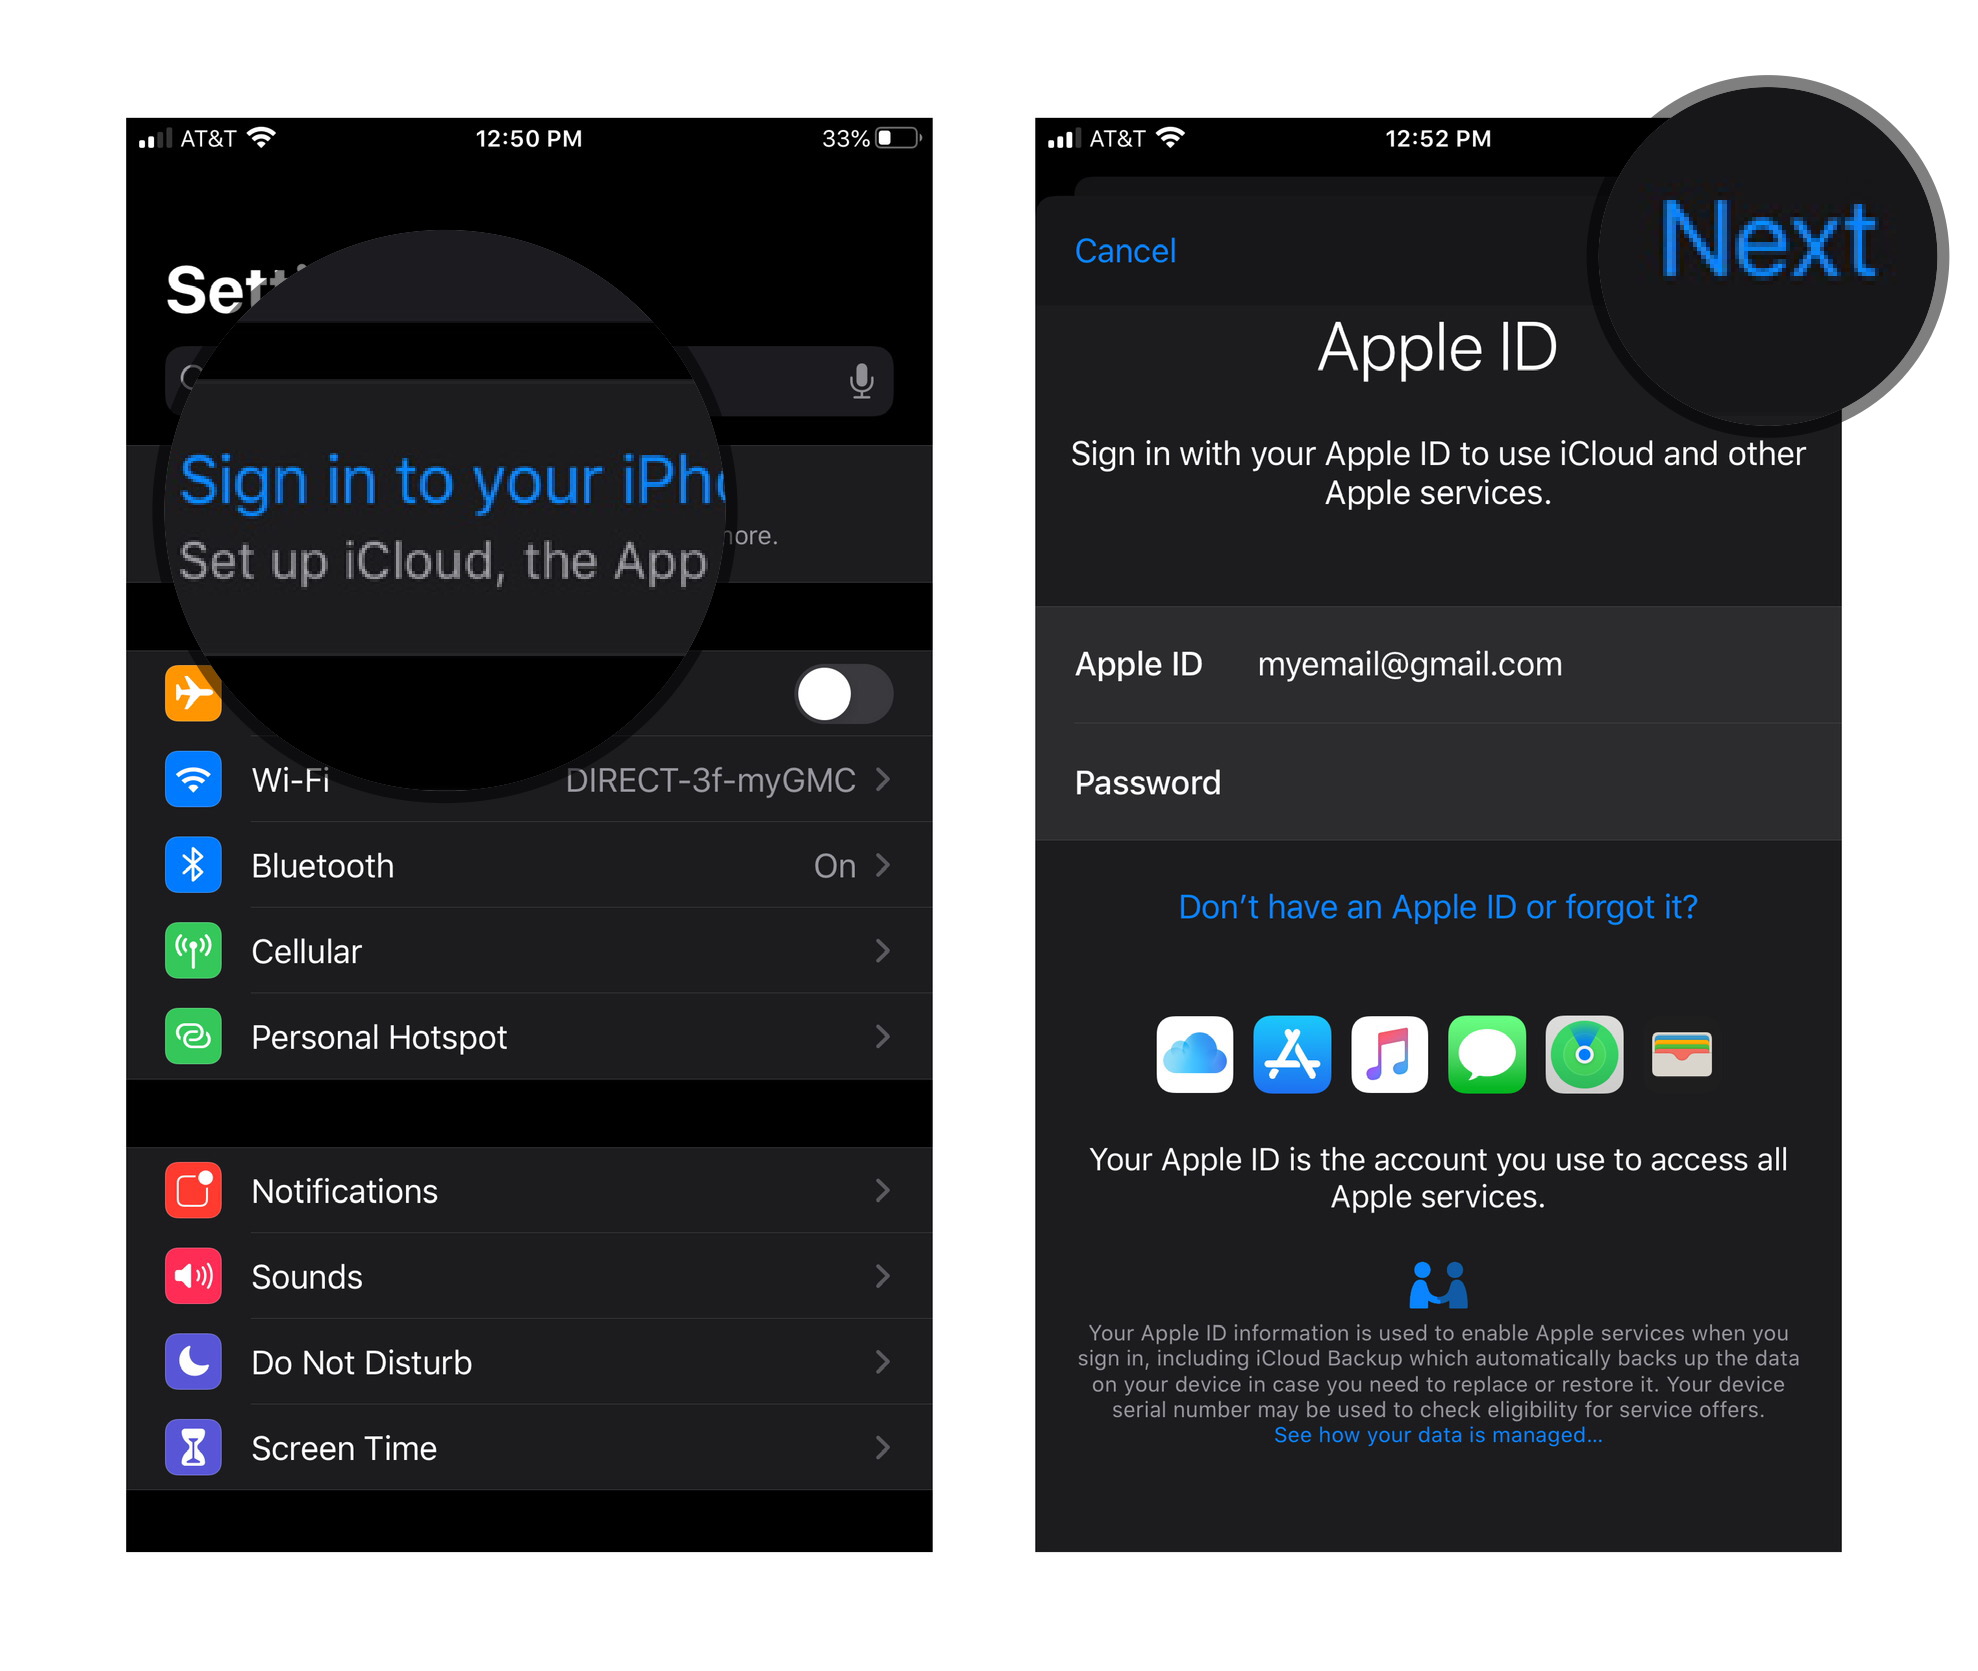 How to sign in Apple ID: Tap Sign in, Enter username, password, and tap Next